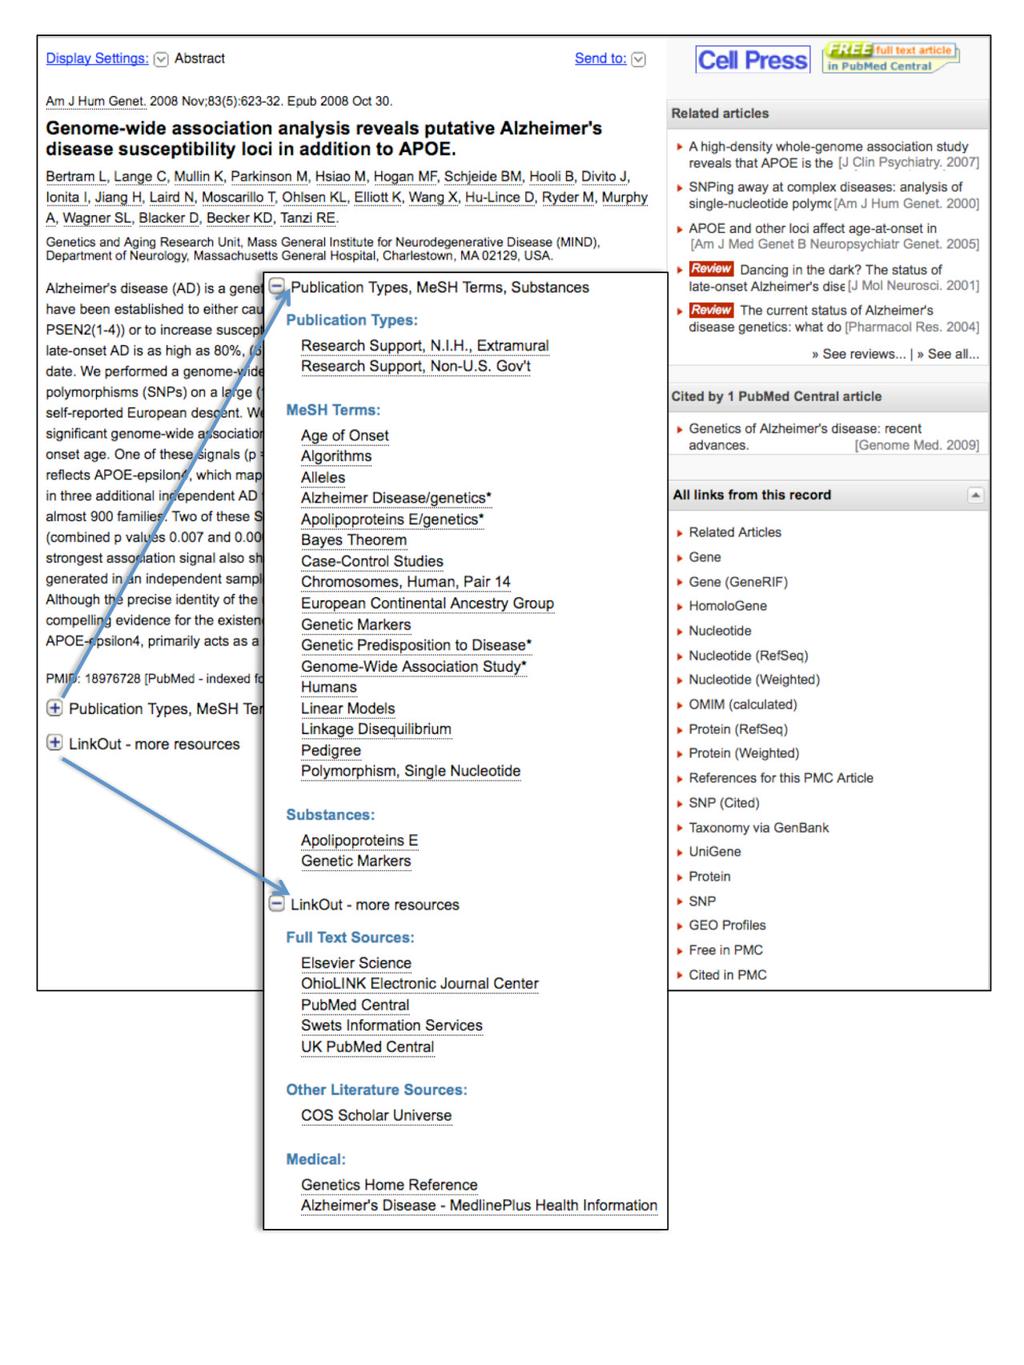 Page 10 Figure 4. The new Abstract format display in PubMed.